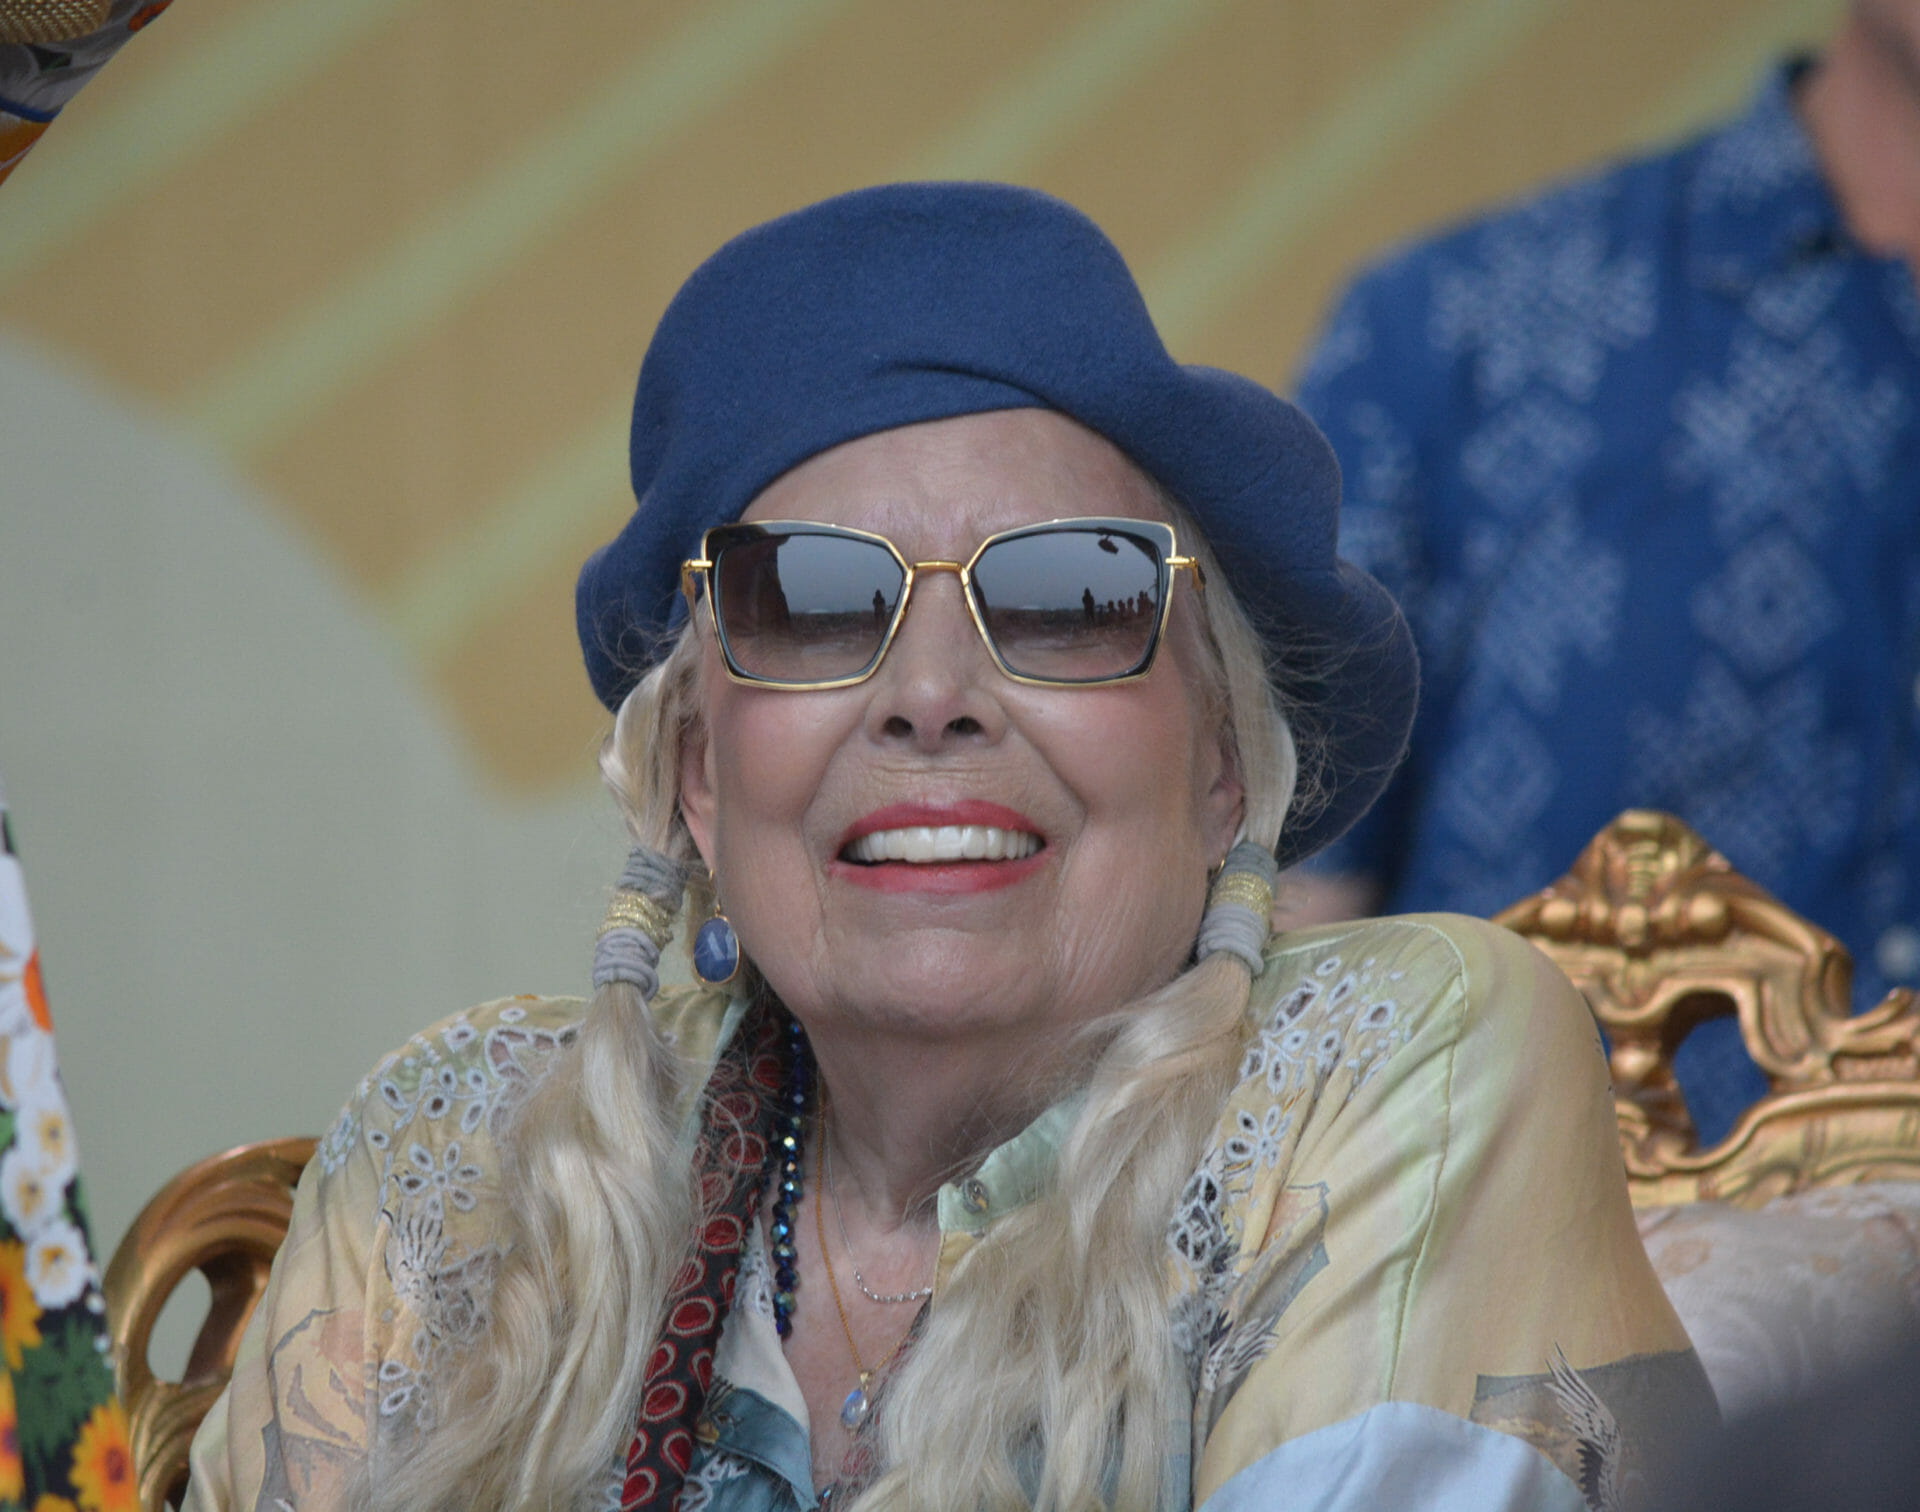 Joni Mitchell Performs First Full Set in Over 20 Years at Newport Folk Festival